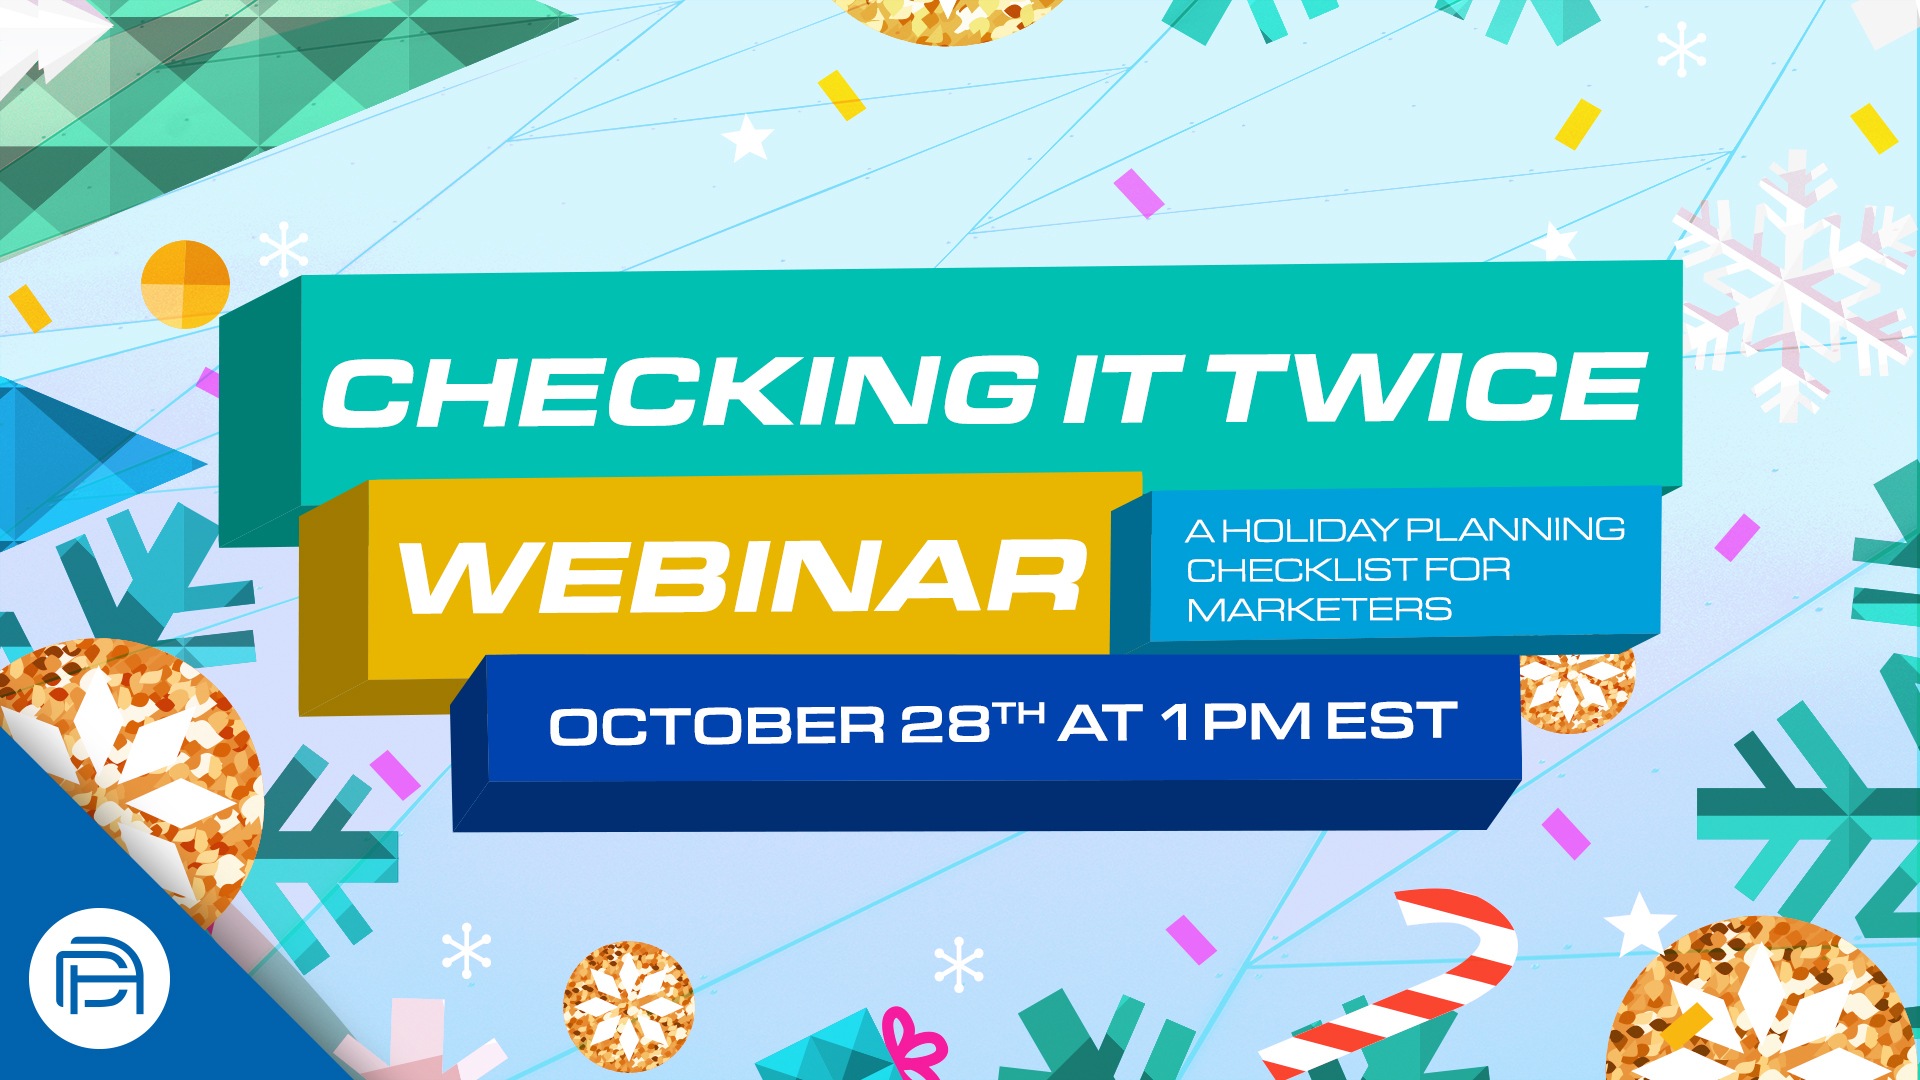 Checking It Twice Webinar: A Holiday Planning Checklist for Marketers